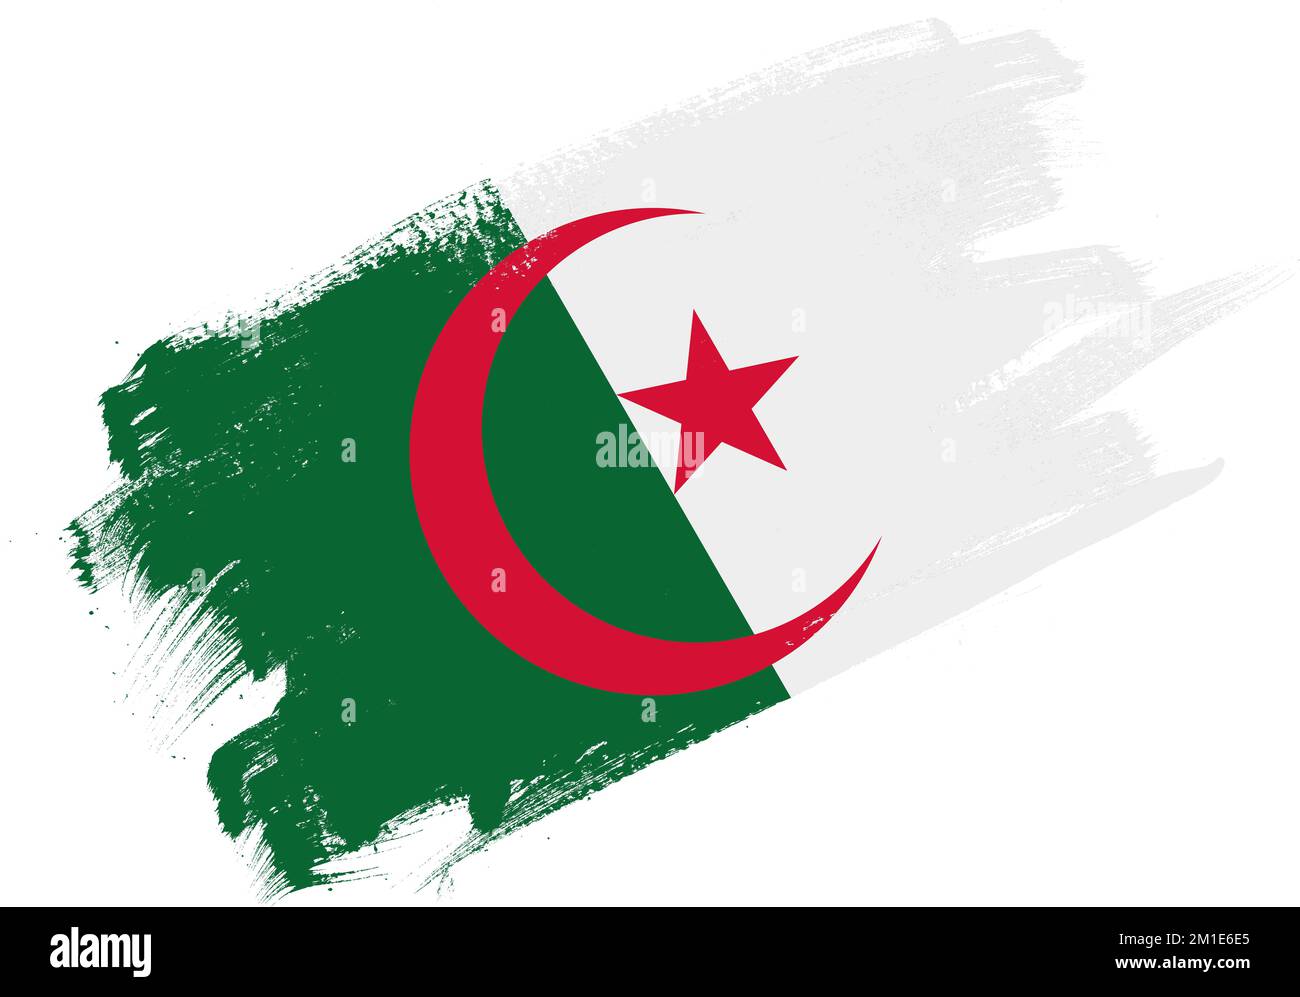 Abstract paint brush textured flag of algeria on white background Stock Photo